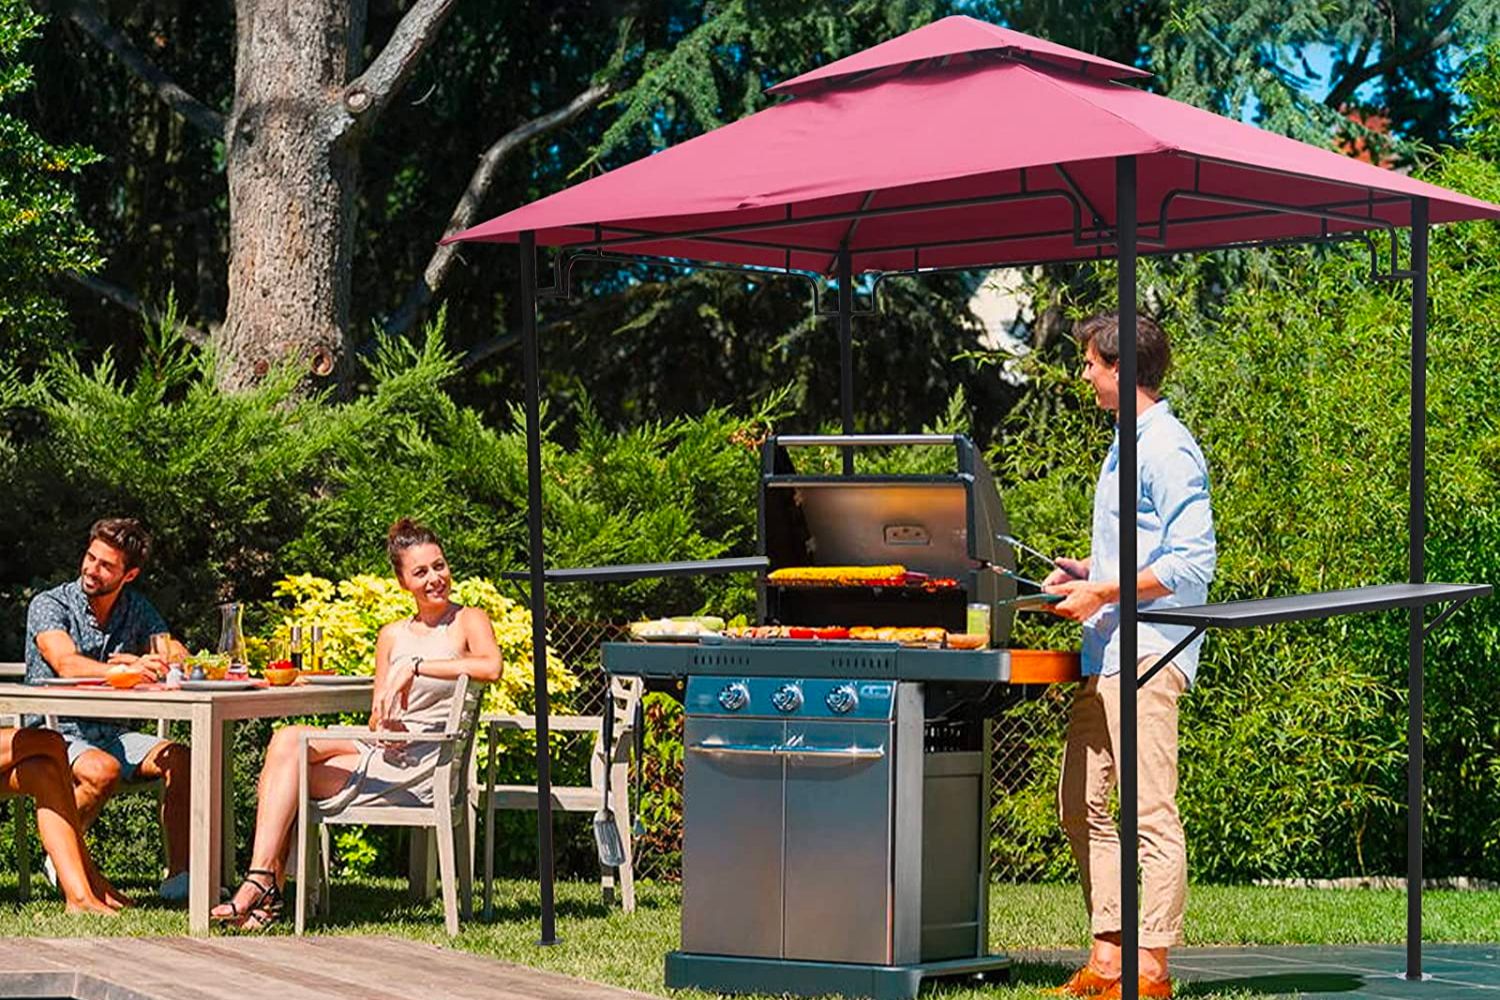 A man and woman outside with one sitting comfortably at a table and the other grilling in the shade under the best grill gazebo option